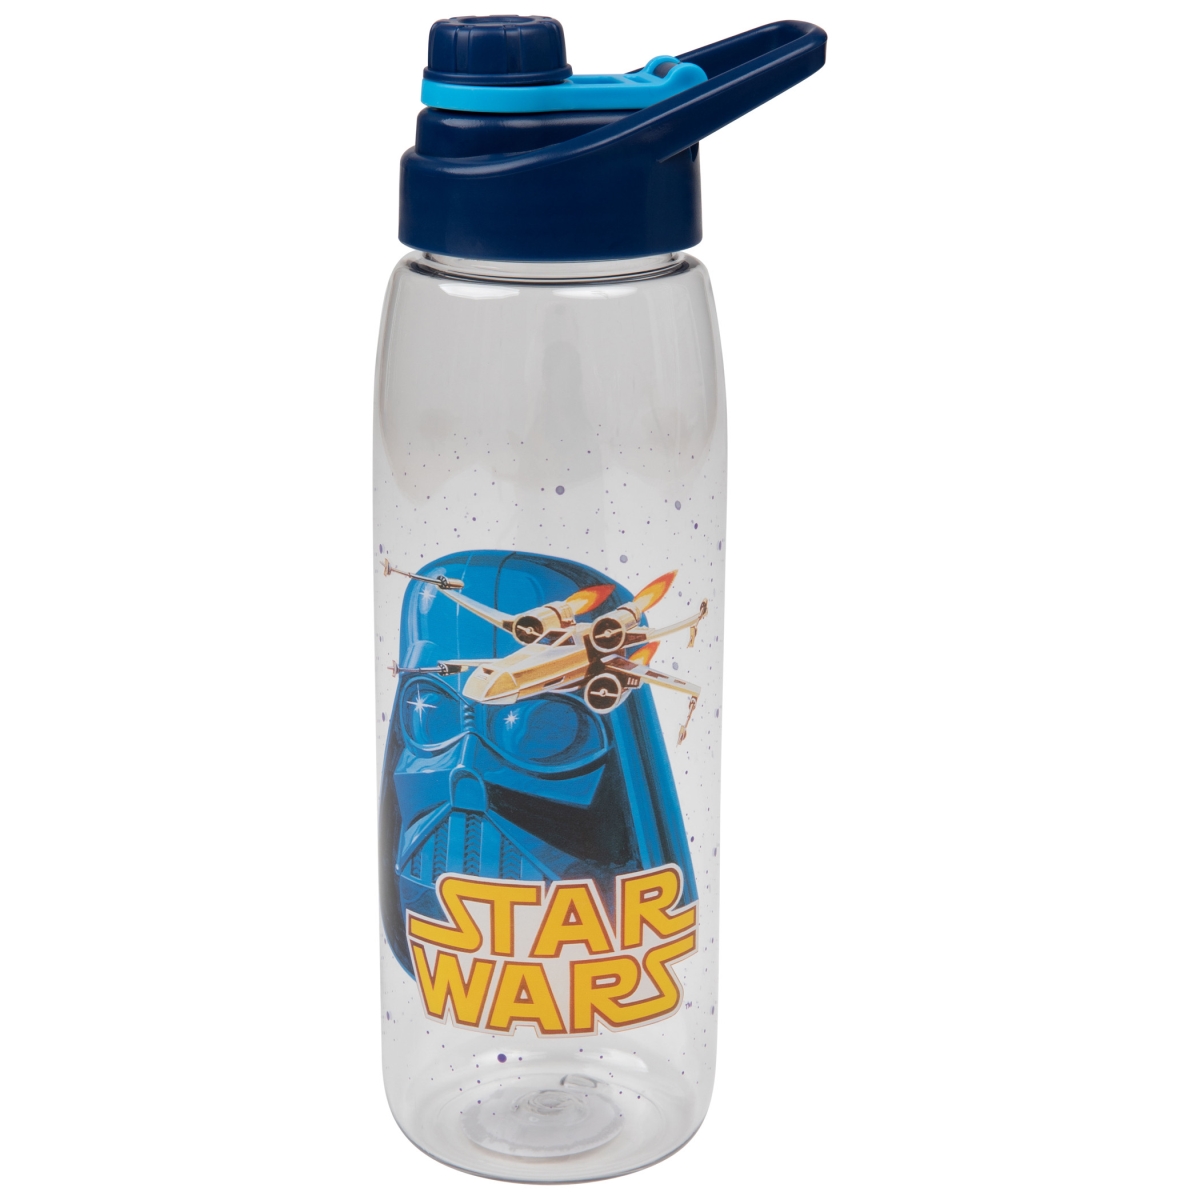 Picture of Star Wars 853639 28 oz Star Wars Darth Vader Water Bottle with Screw Lid